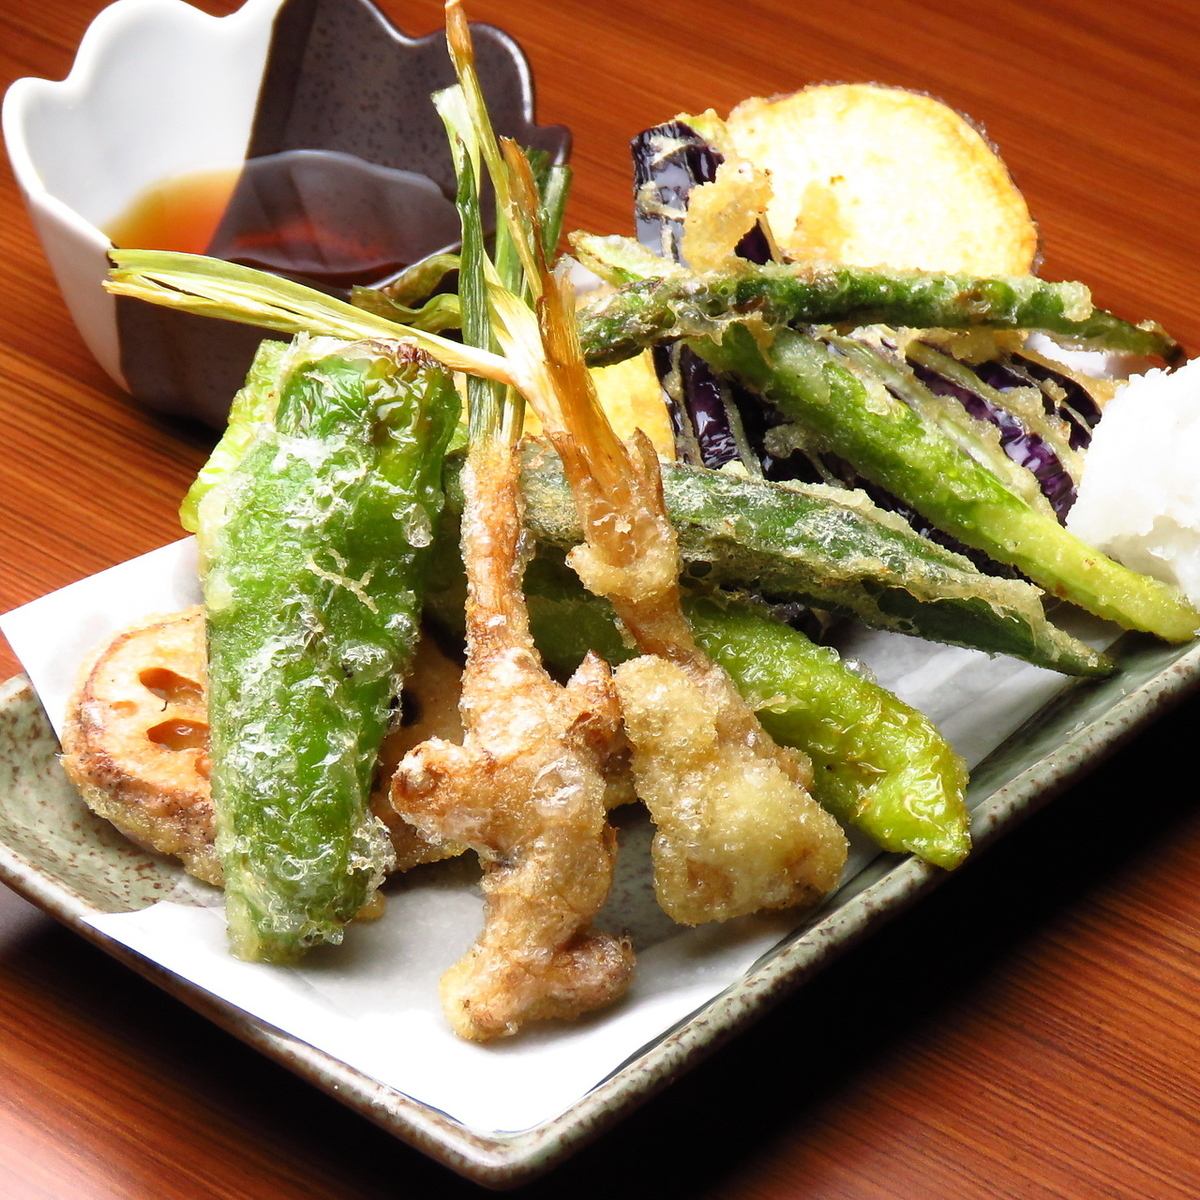 The tempura made with fresh vegetables procured at the greengrocer and the sashimi made with Toyosu fish are superb.